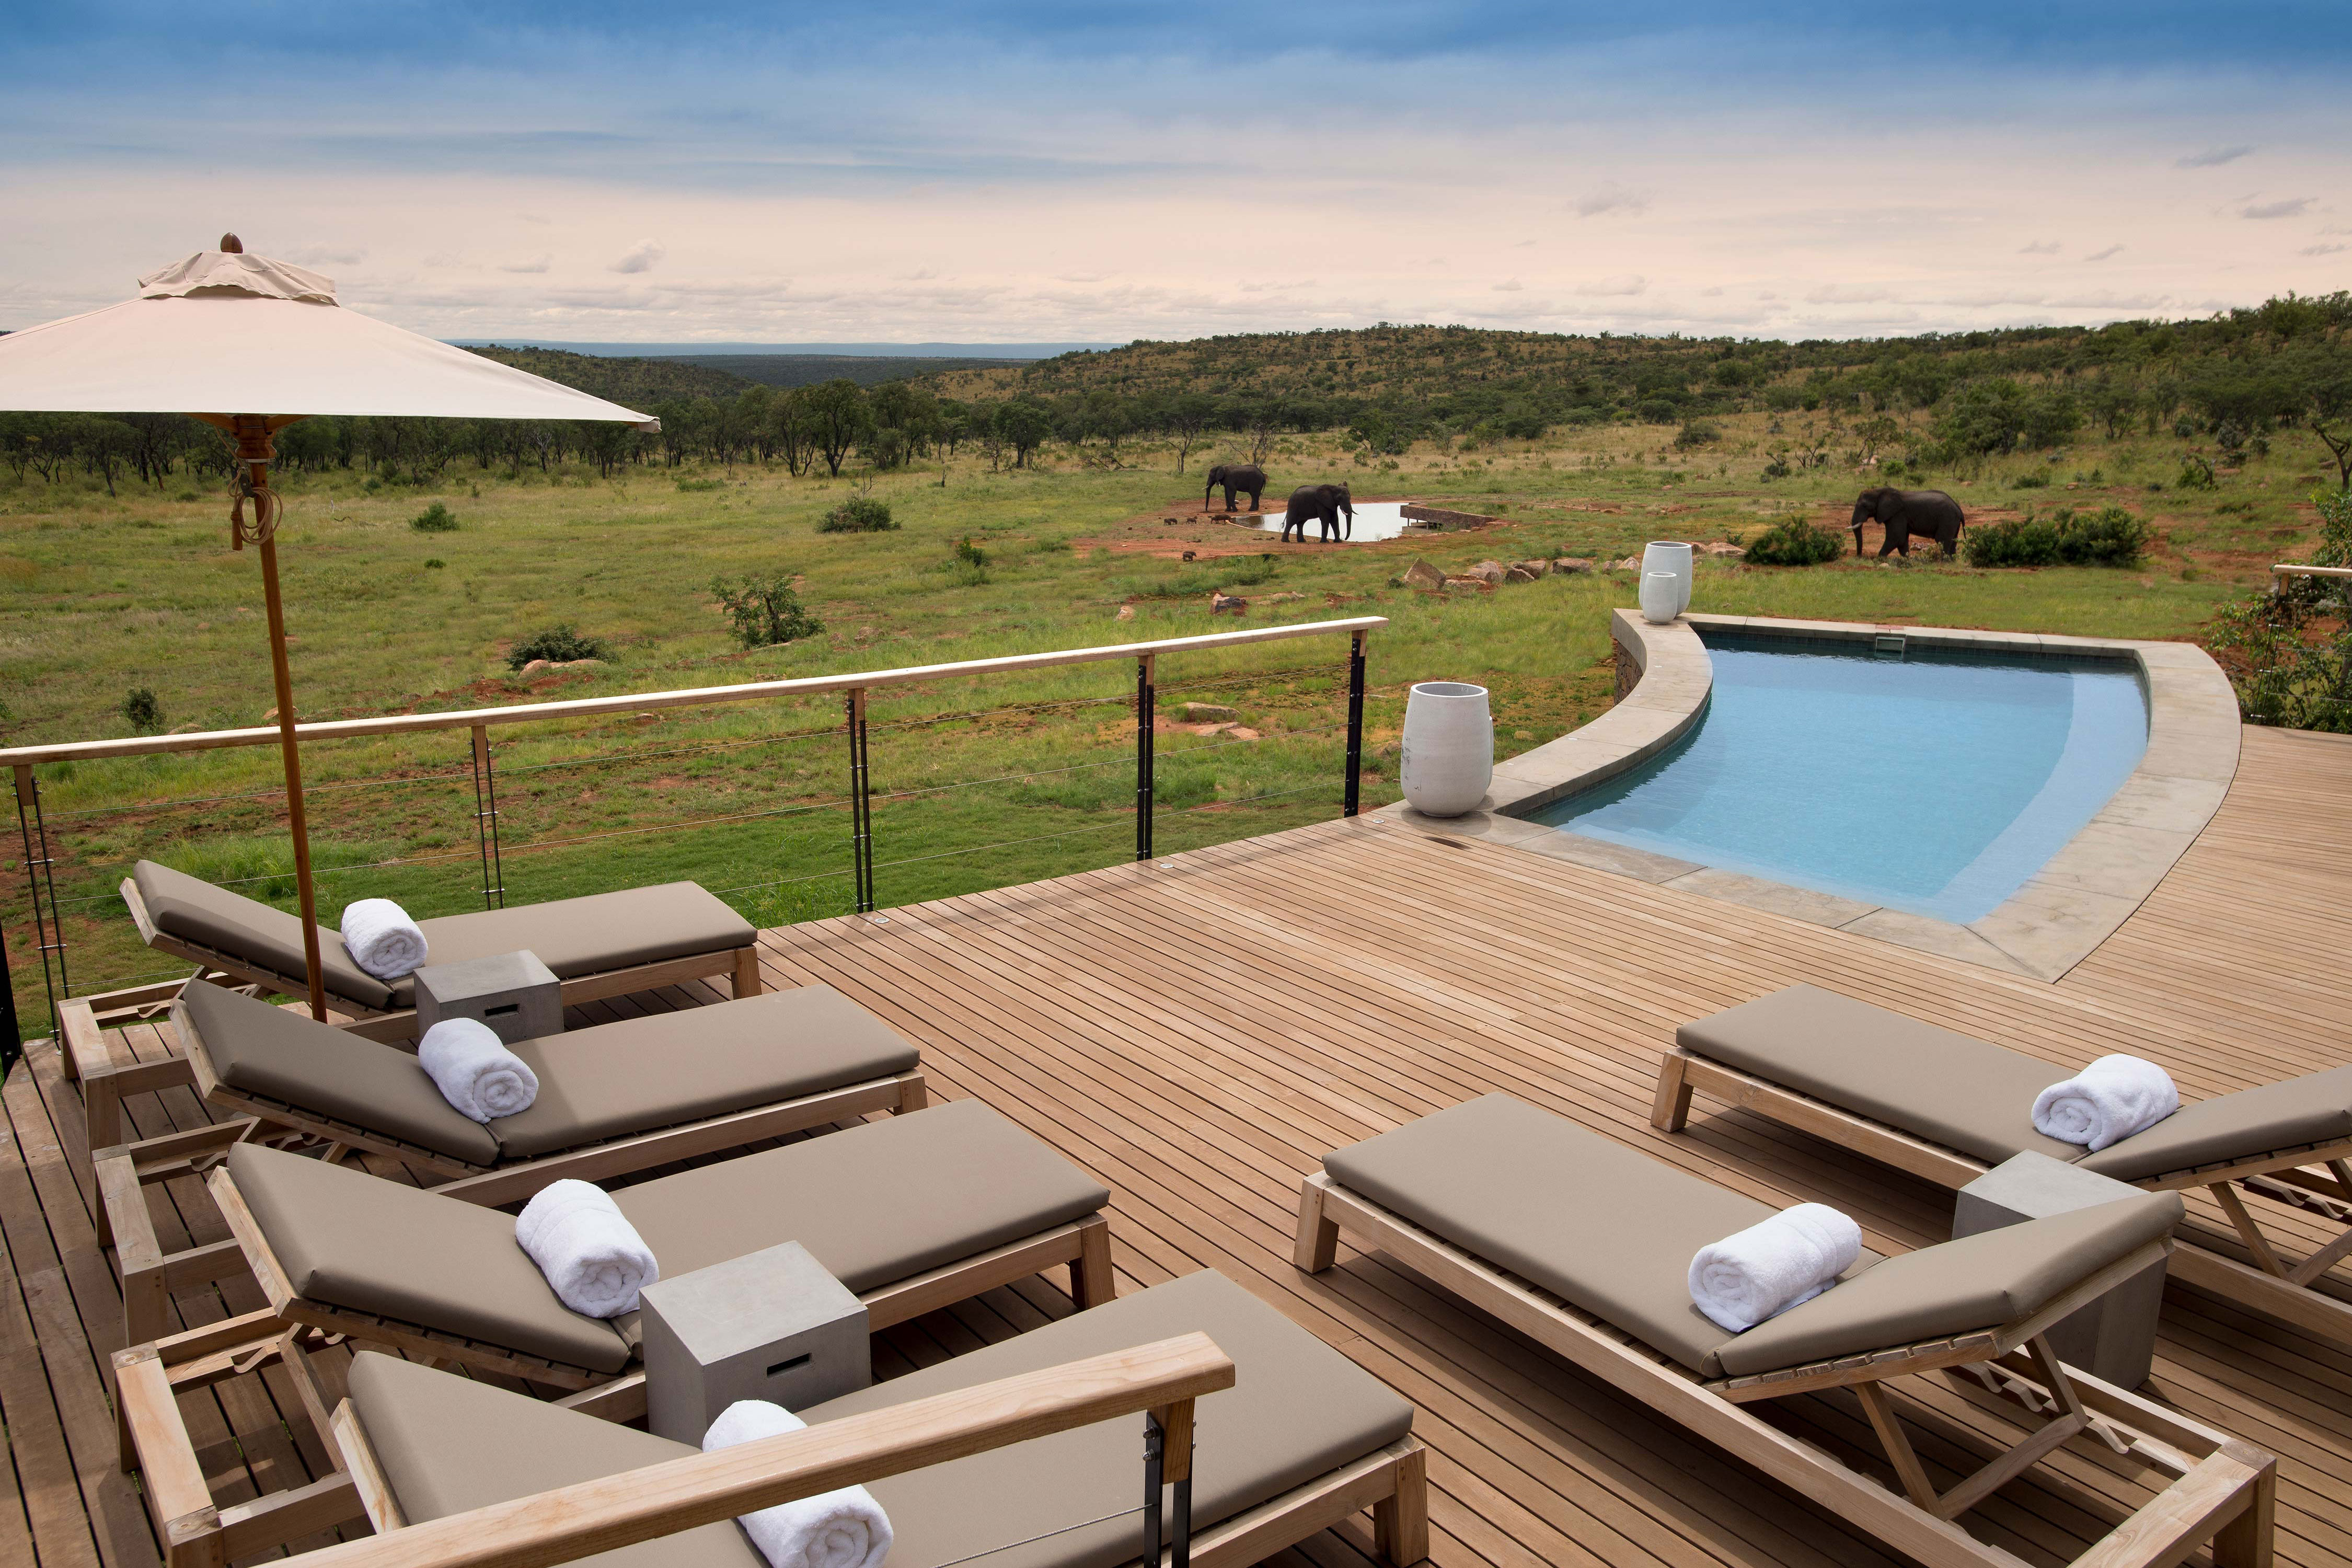 Luxury villas for family holidays | Mhondoro, South Africa | Mr & Mrs Smith Editorial 